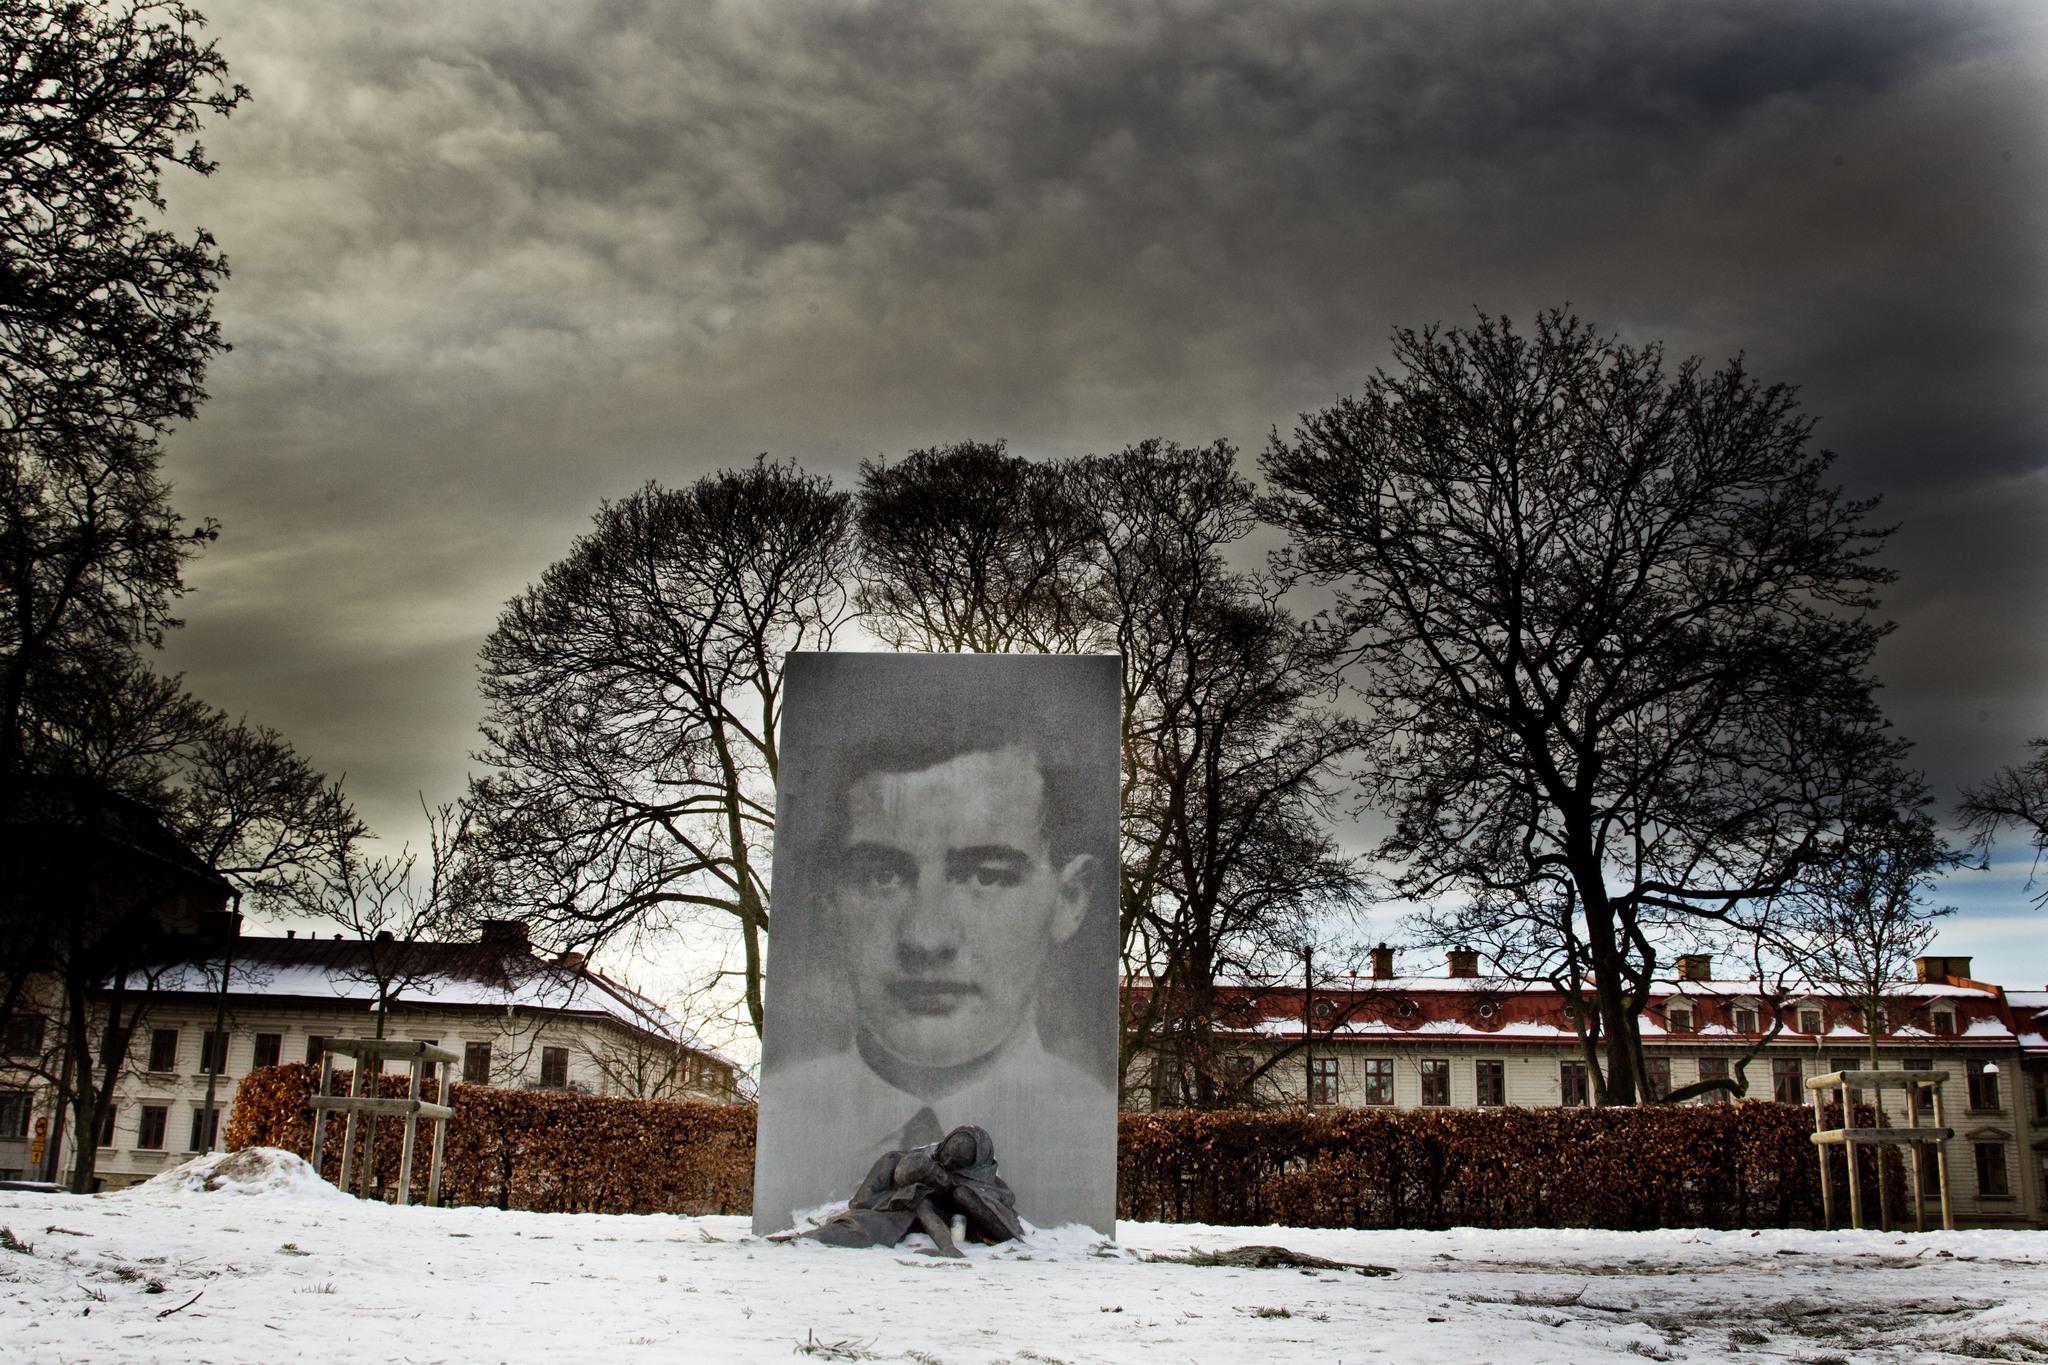 A Raoul Wallenberg monument in a park.